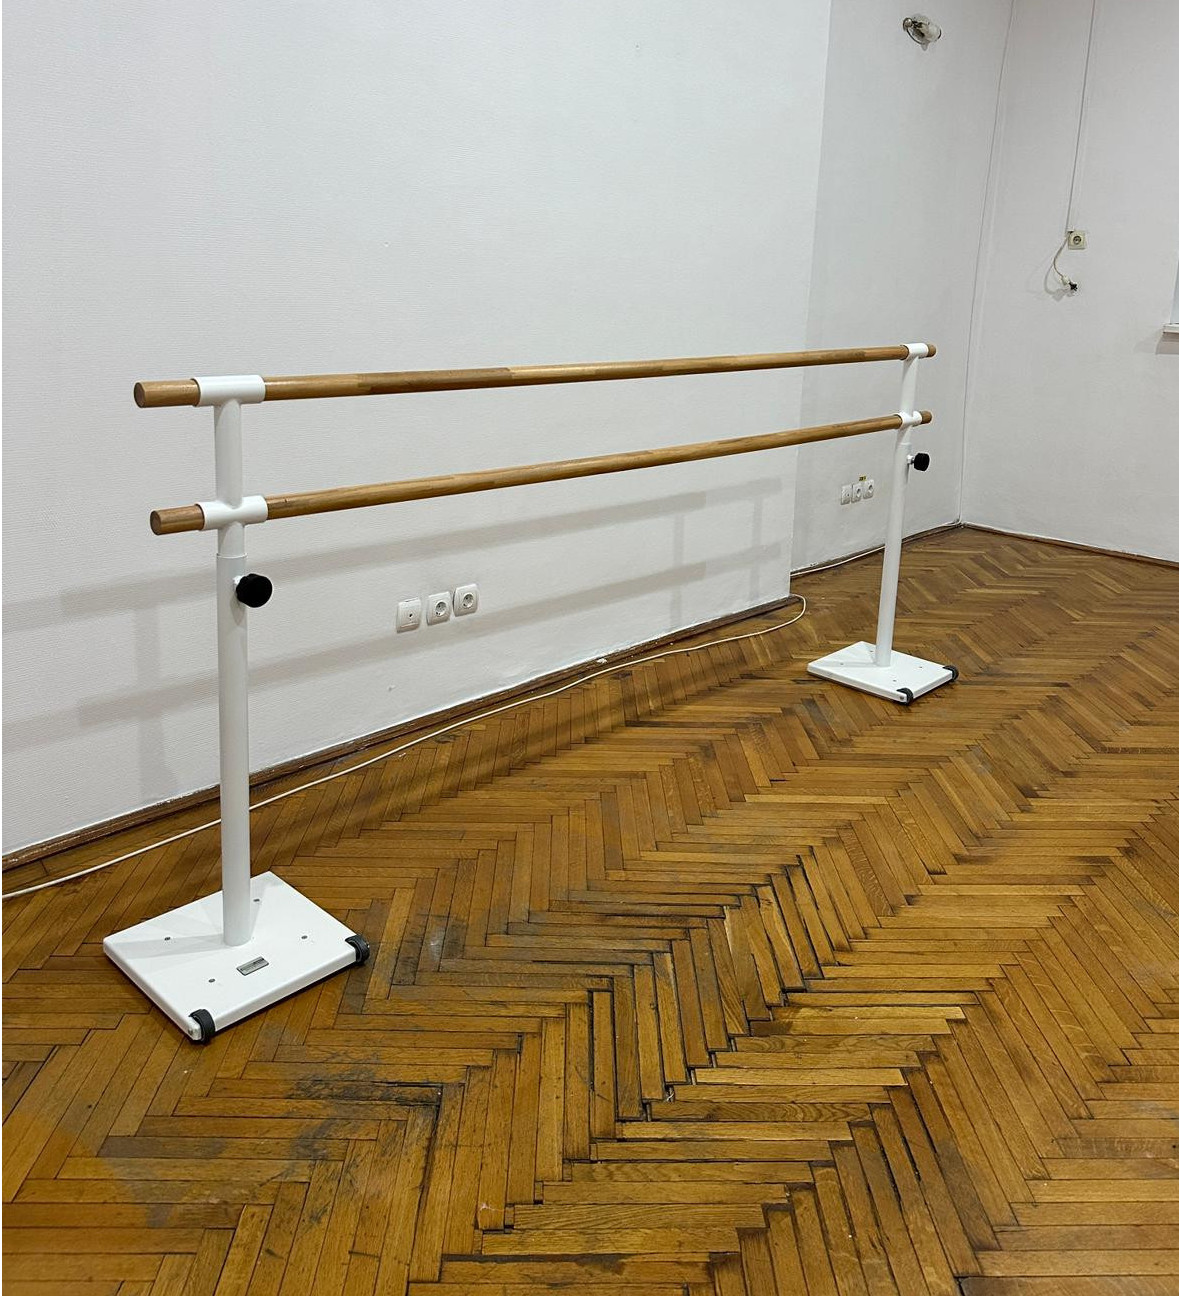 The Search for Portable Ballet Barres